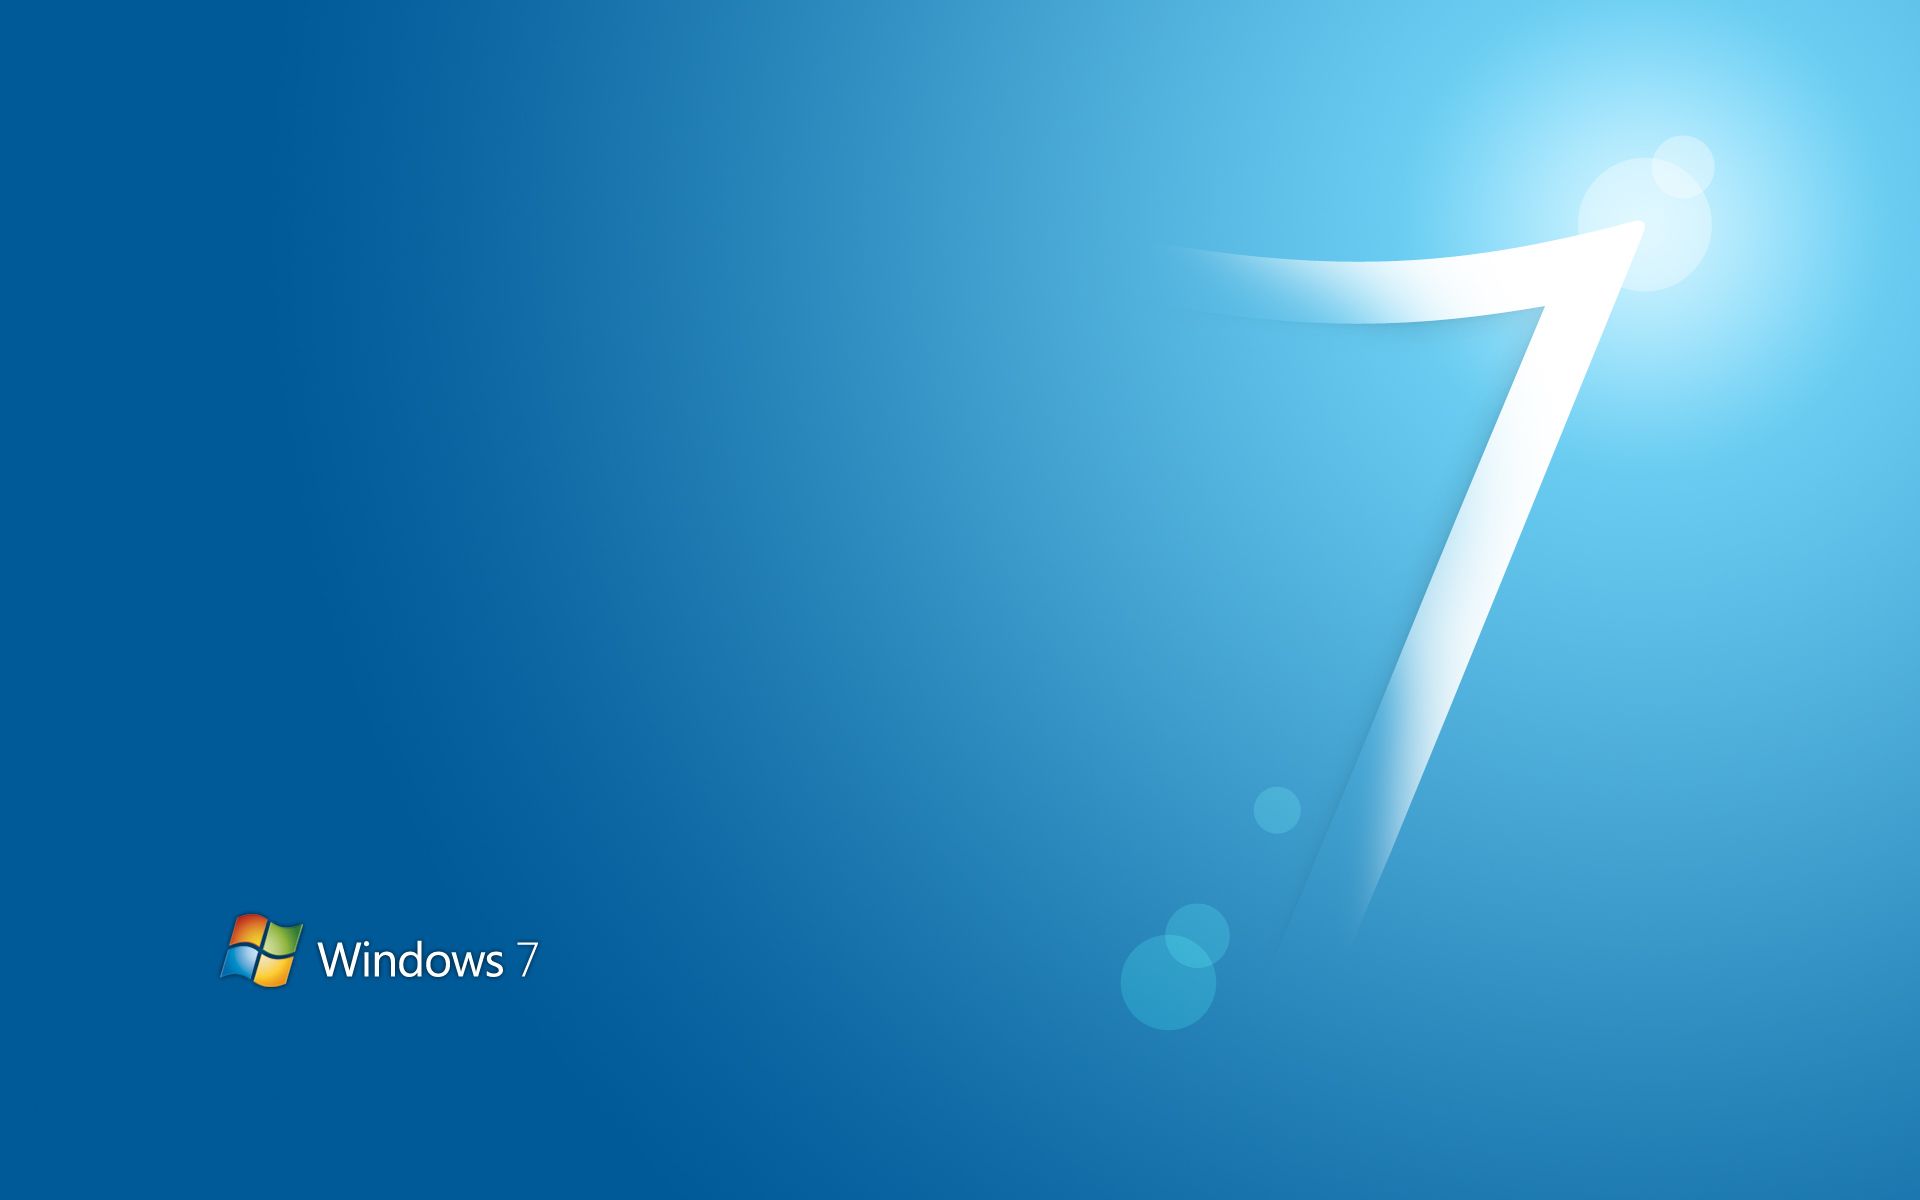 Free download Windows 7 Background Picturecom 1920x1200